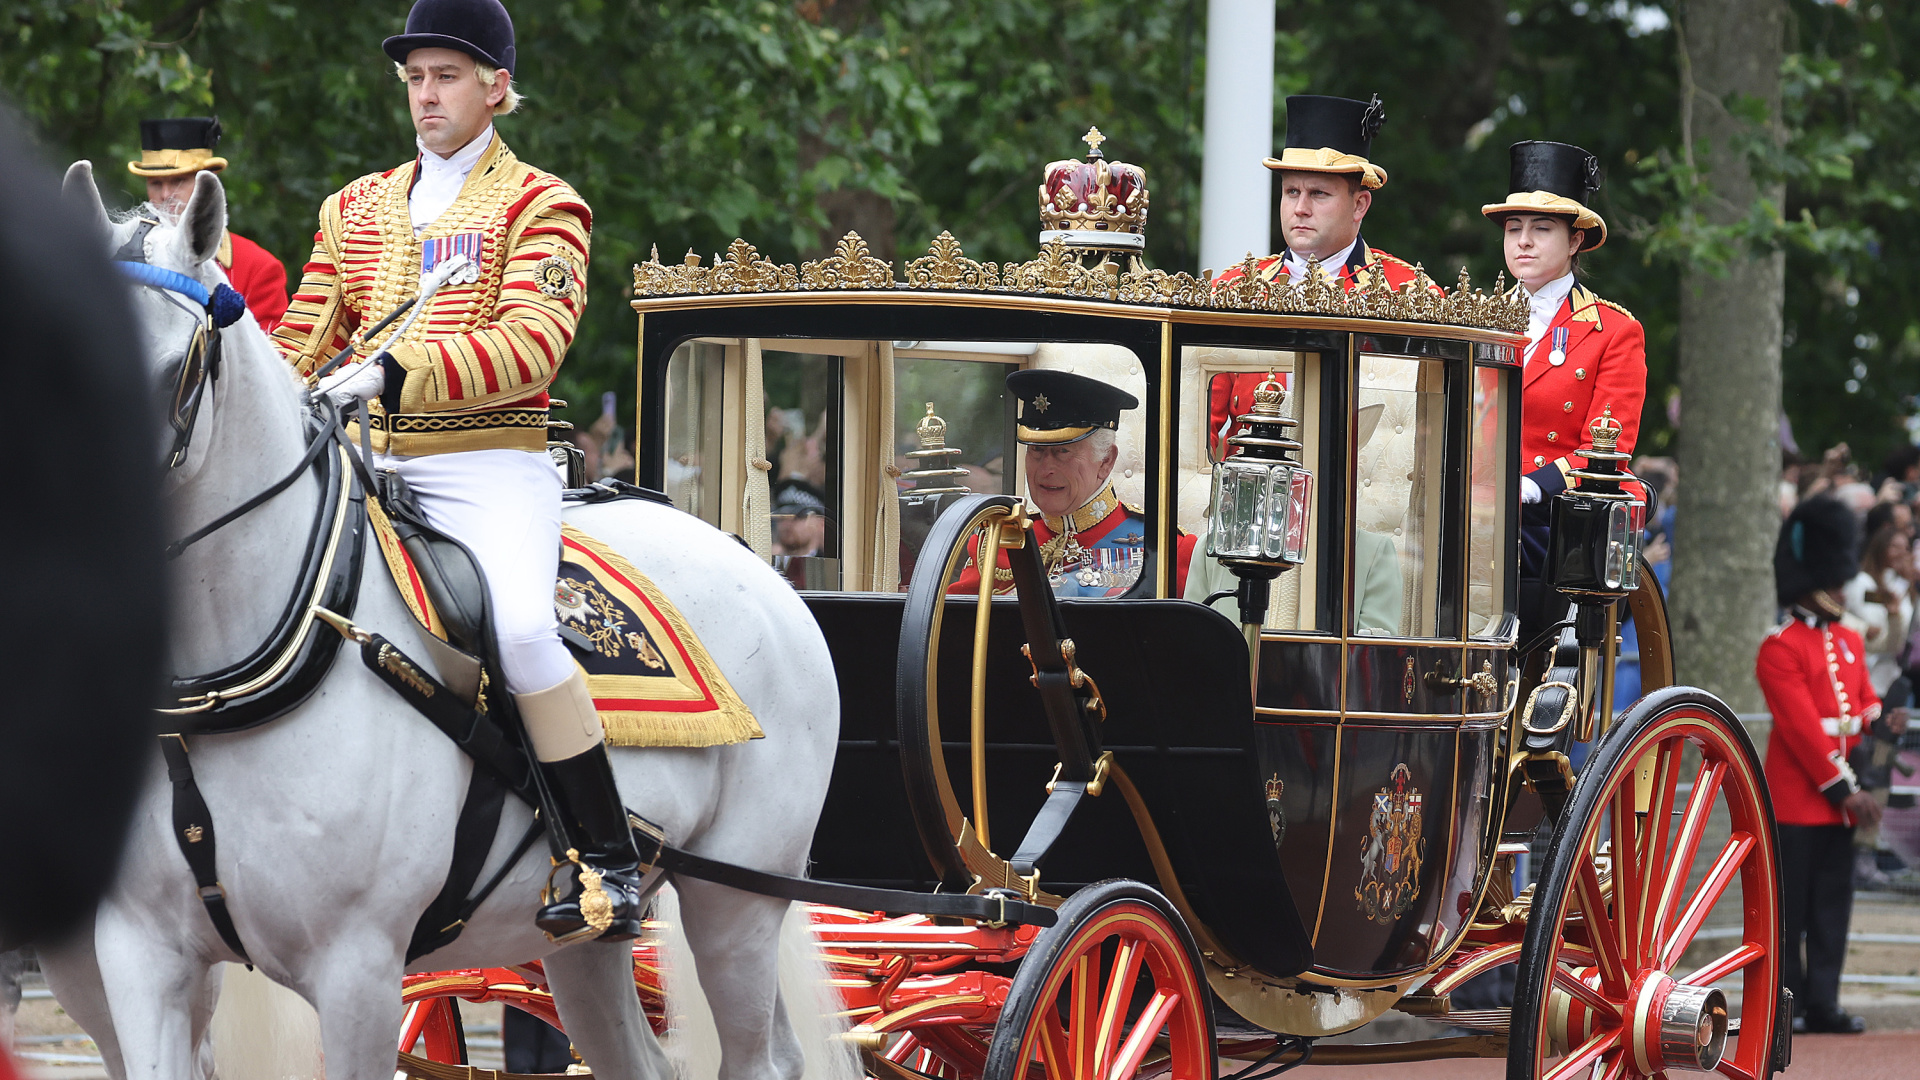 Trooping the Colour commemorates the birthday of Charles III